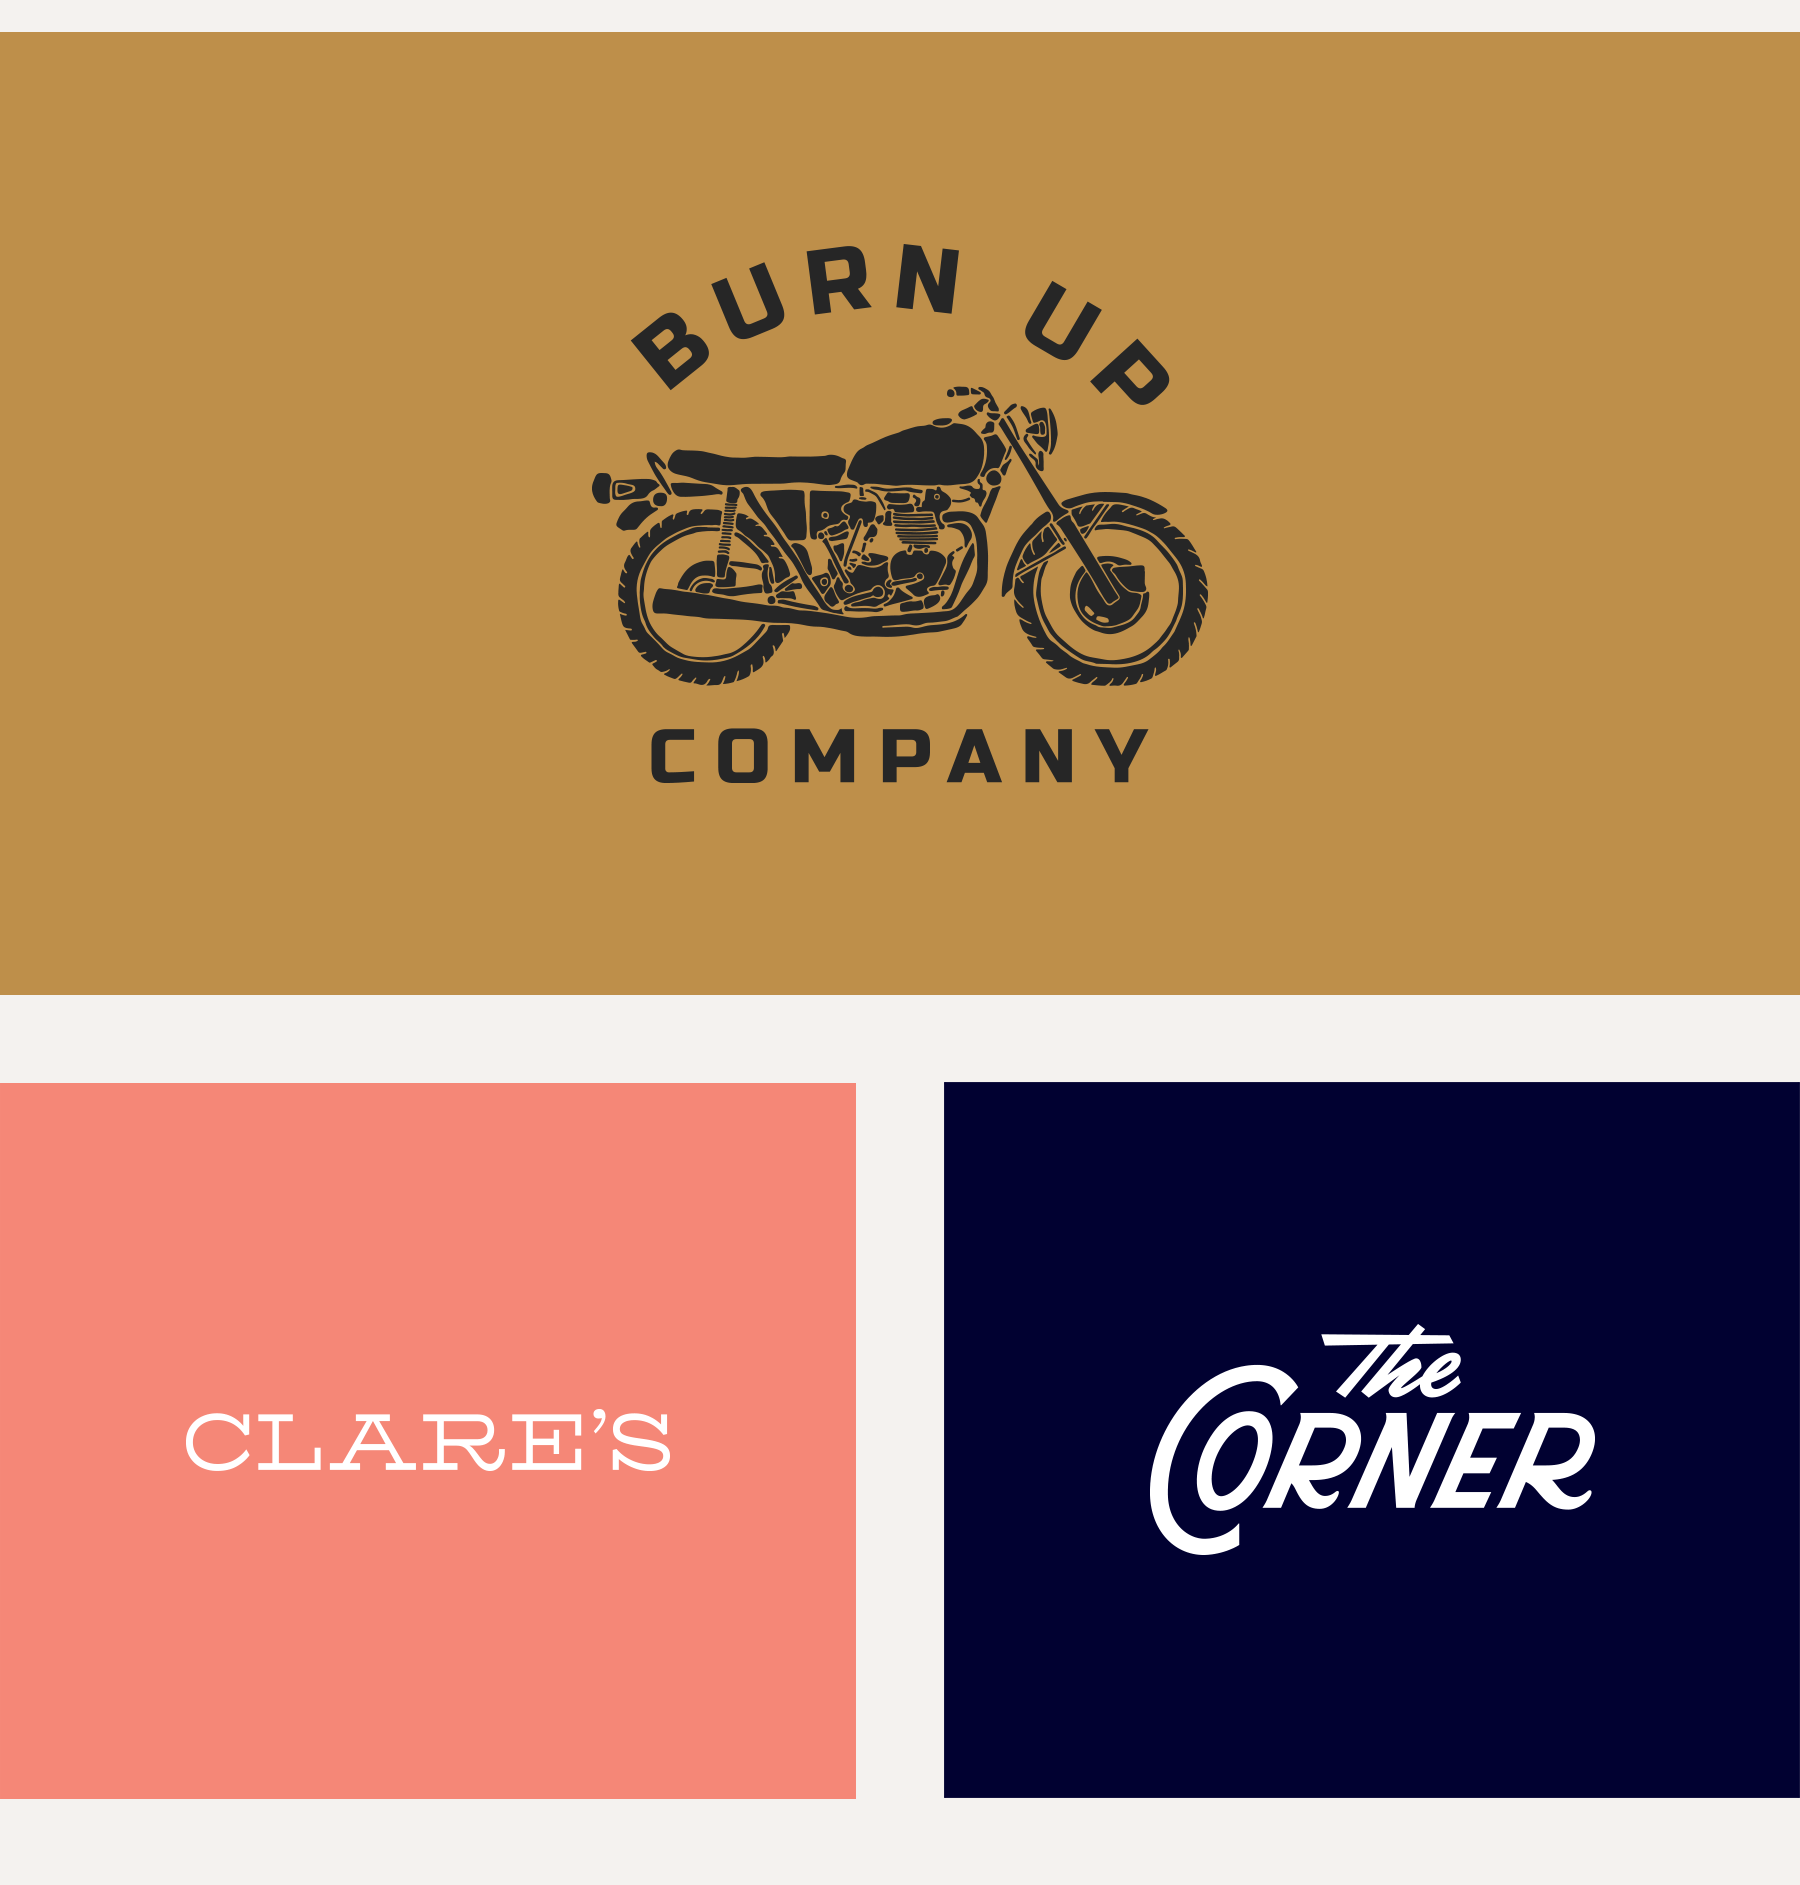 Animated logo variations of Burn Up Company featuring a custom motorcycle illustration, Clares featuring a chicken icon, and The Corner rough explorations.